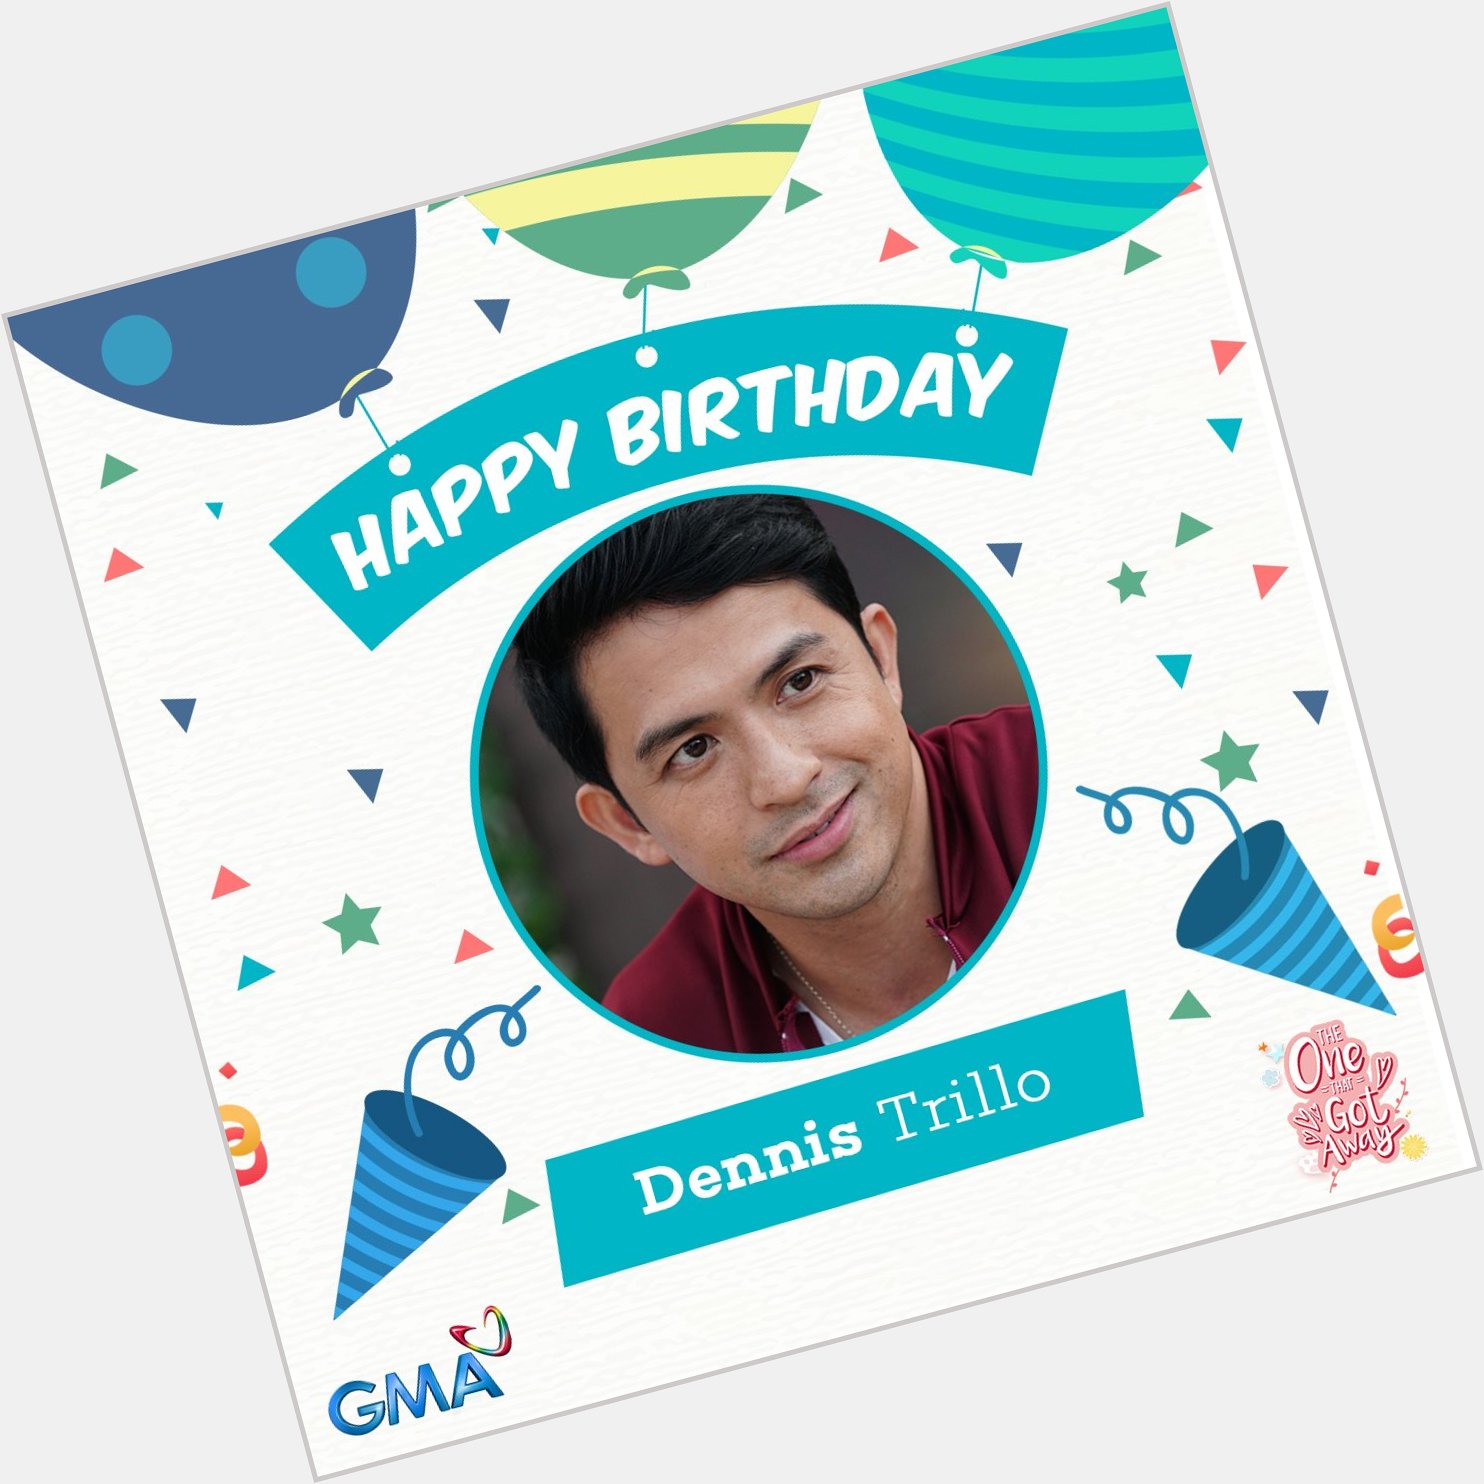 Happy birthday, Dennis Trillo! Your family wishes you a day filled with love and happiness. 